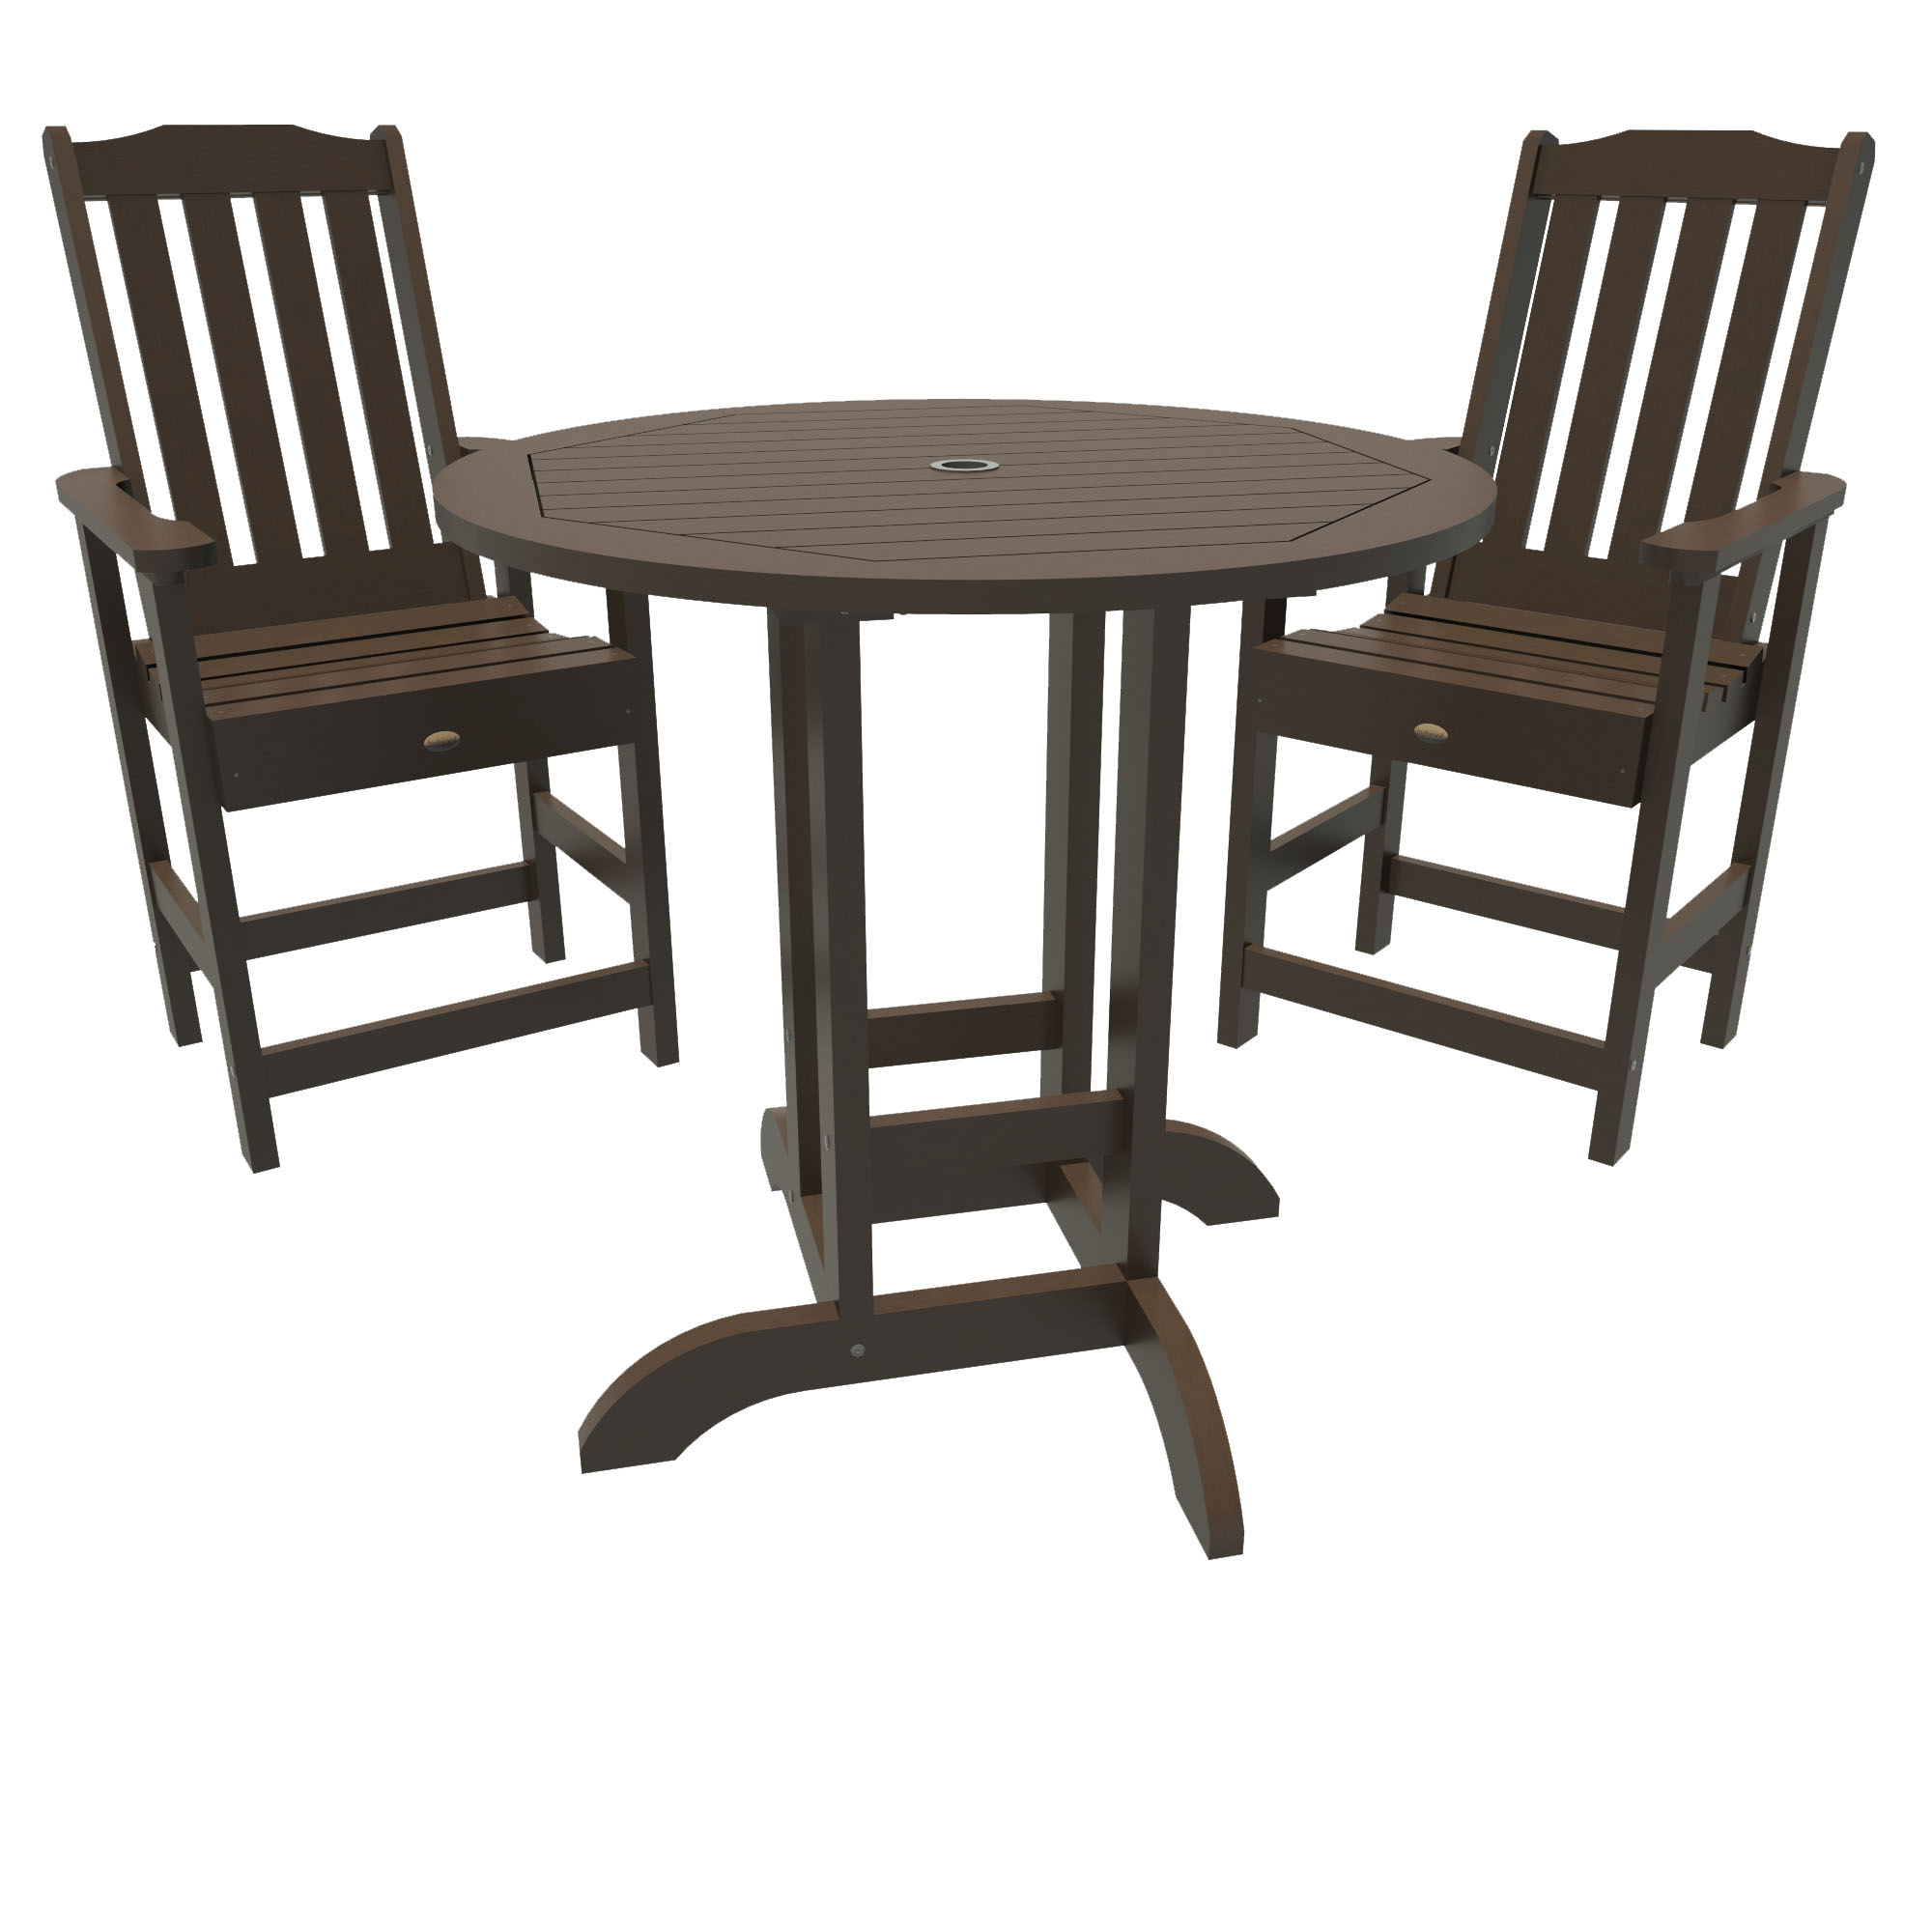 Highwood 3pc Lehigh Round Dining Set - Counter Height - image 1 of 7